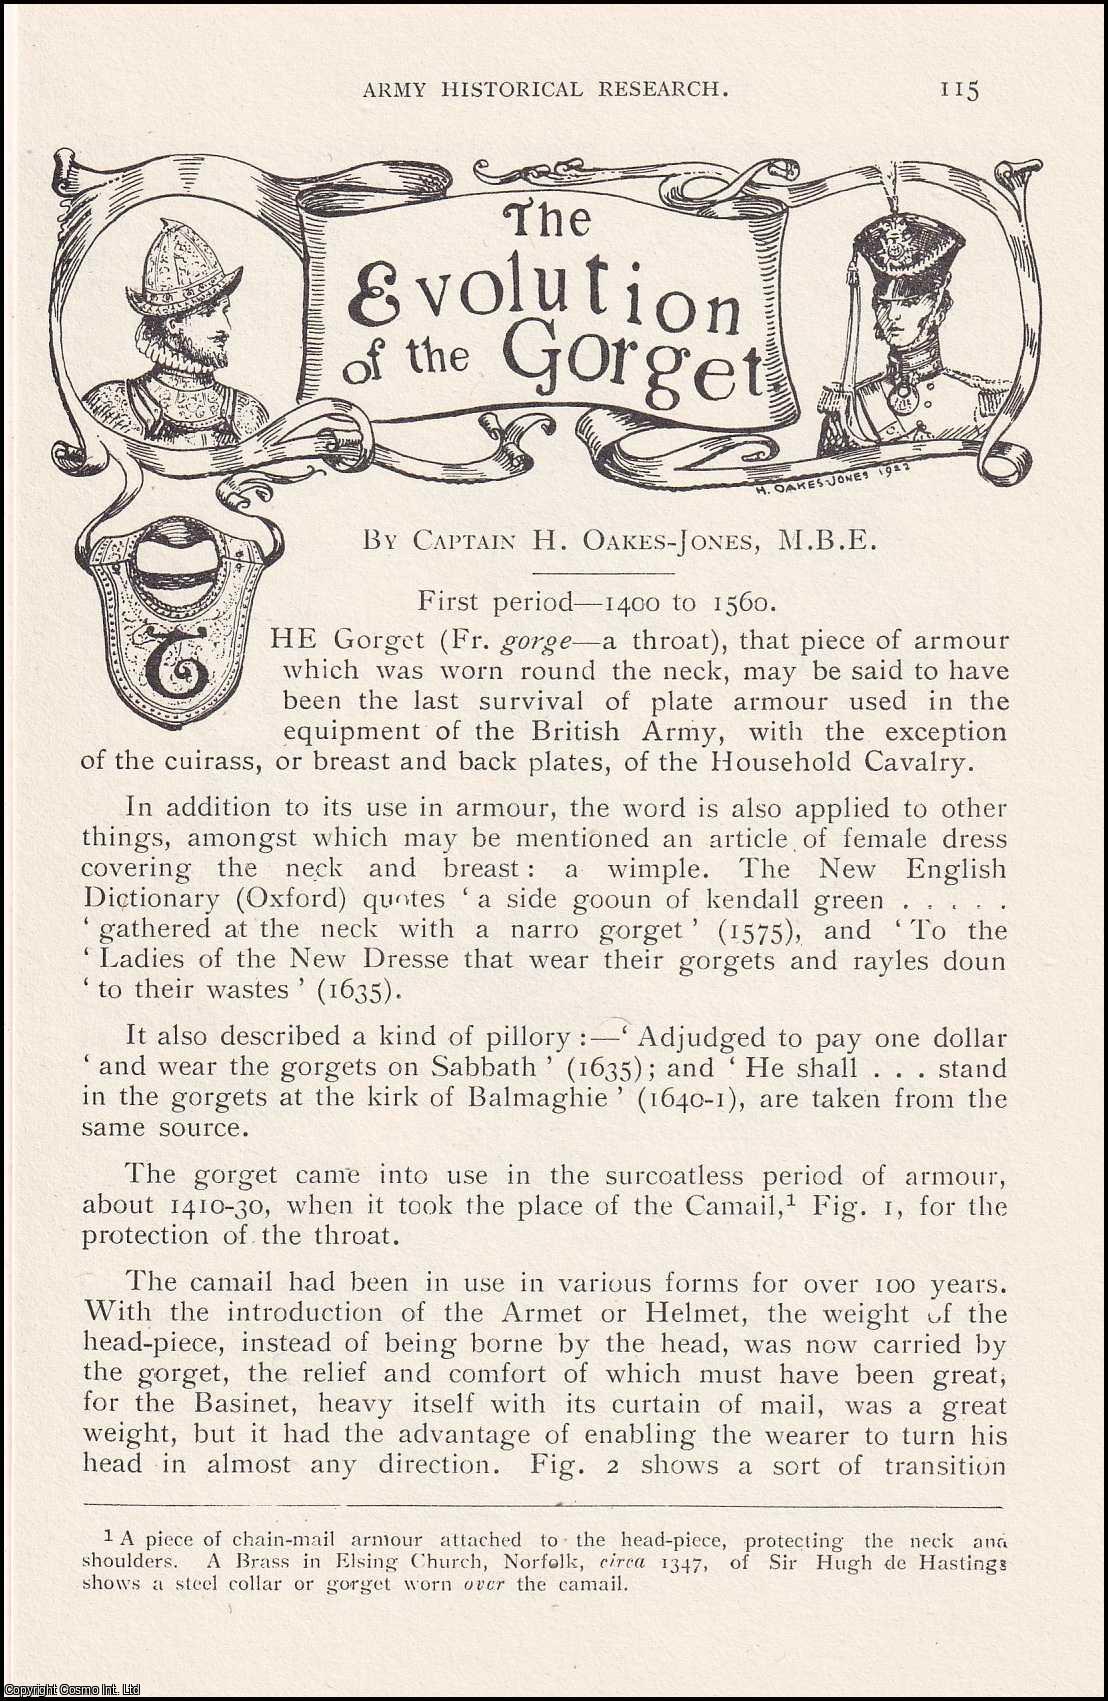 Captain H. Oakes-Jones - The Evolution of the Gorget (throat or neck armour). An original article from the Journal of the Society for Army Historical Research.